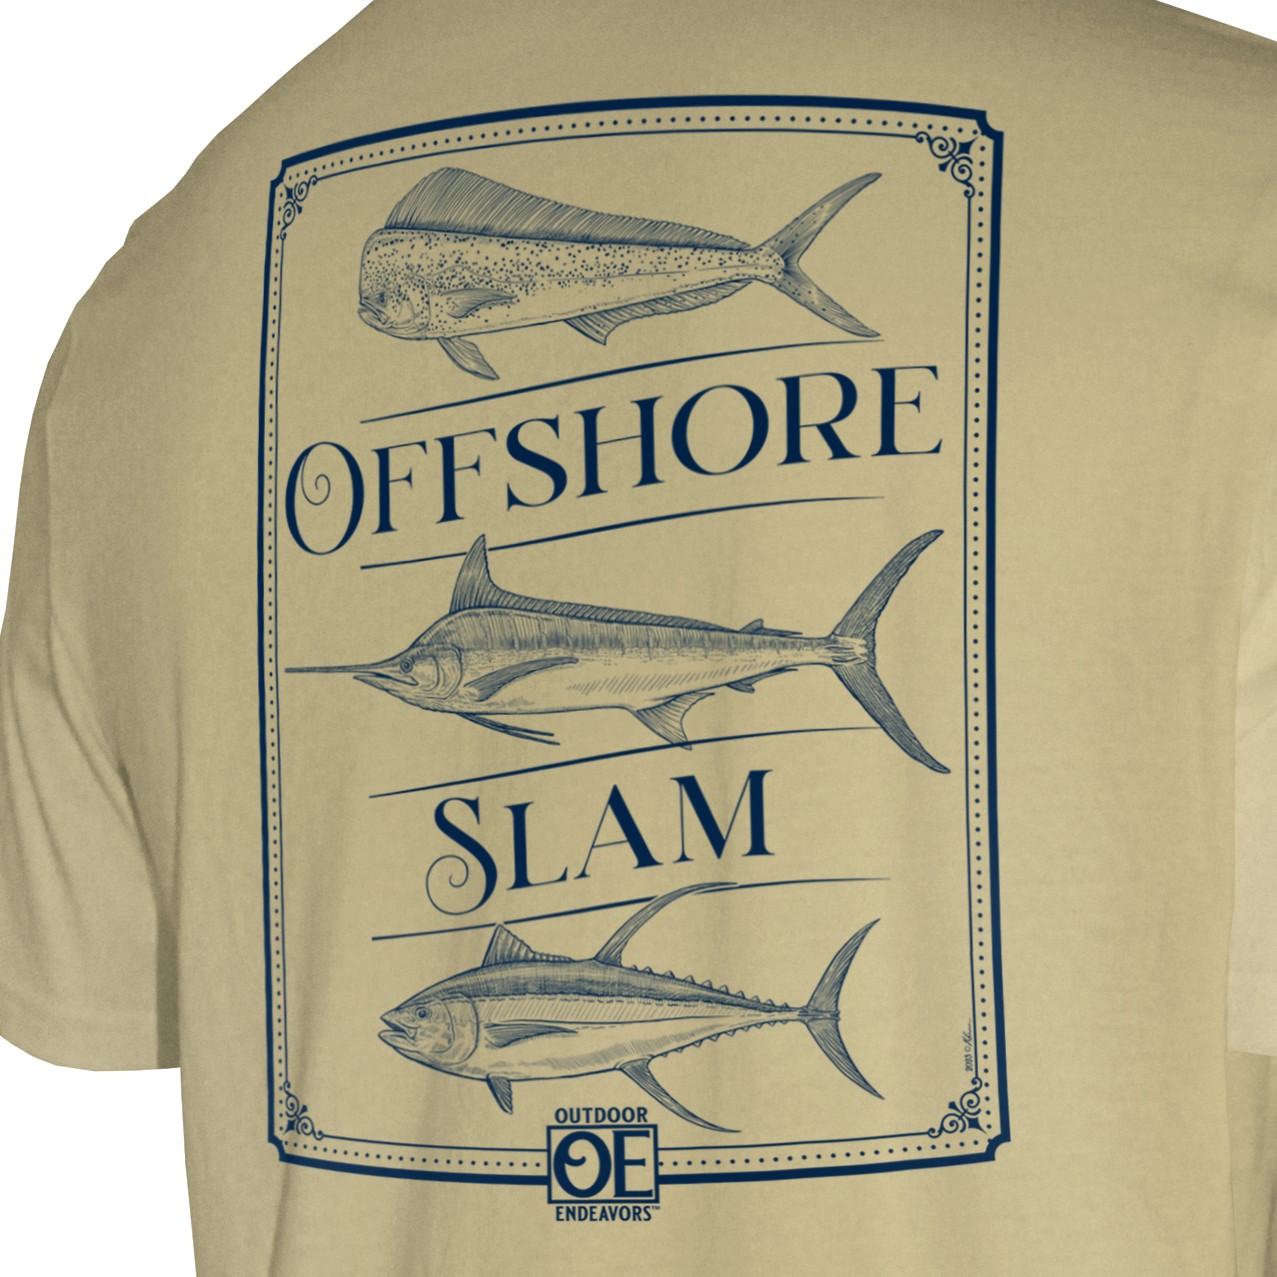 Outdoor Endeavors Classic - American Made Tee - Offshore Slam